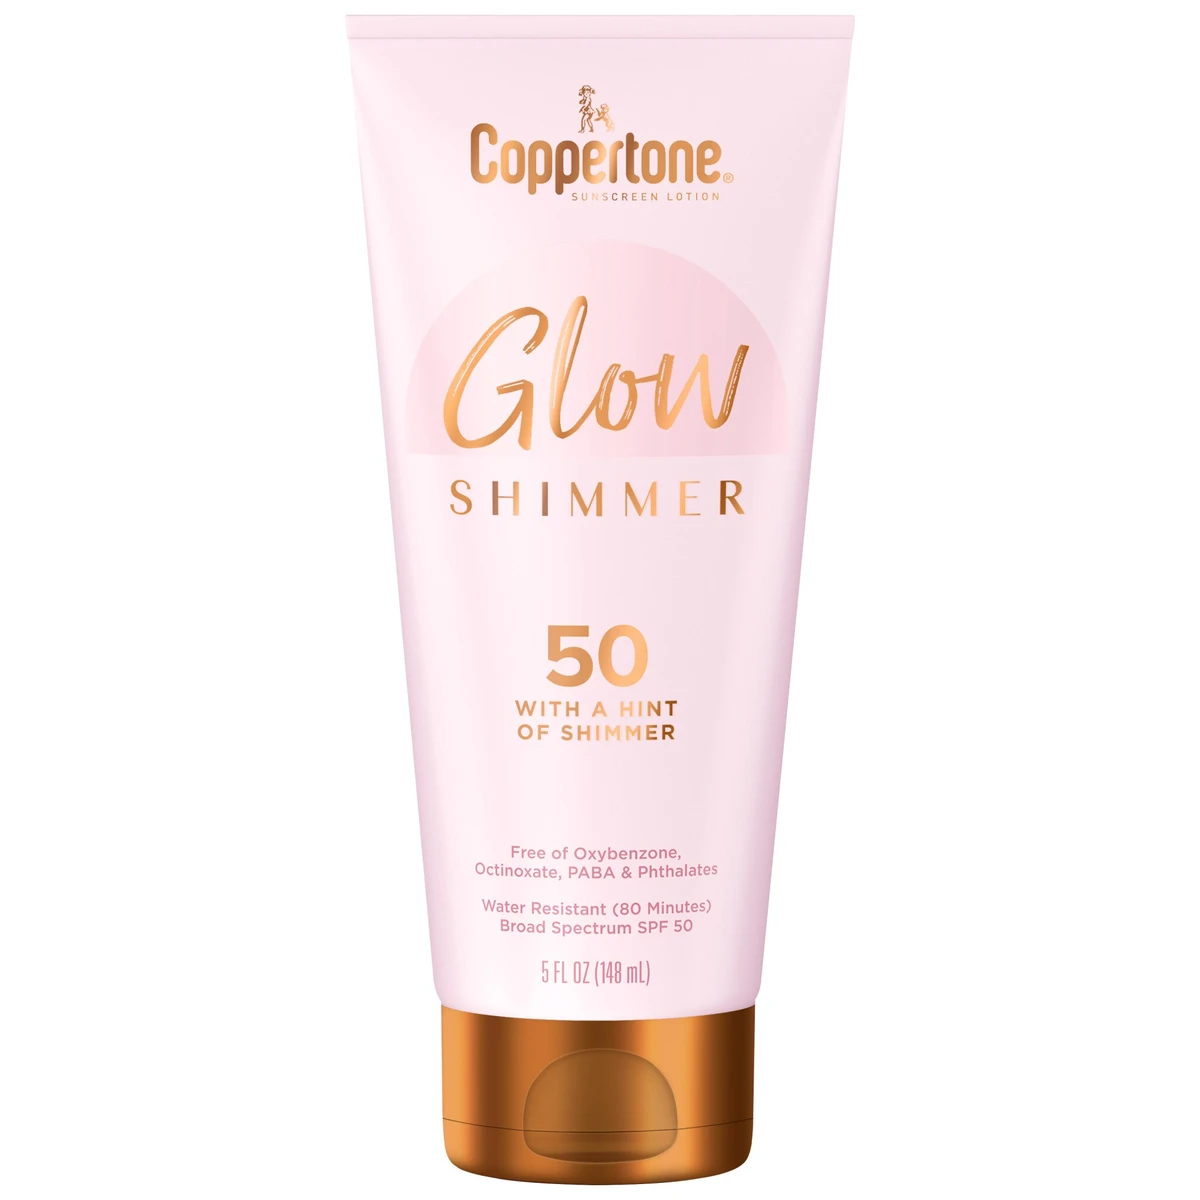 Coppertone Glow With Shimmer Sunscreen Lotion  SPF 50  5 fl oz